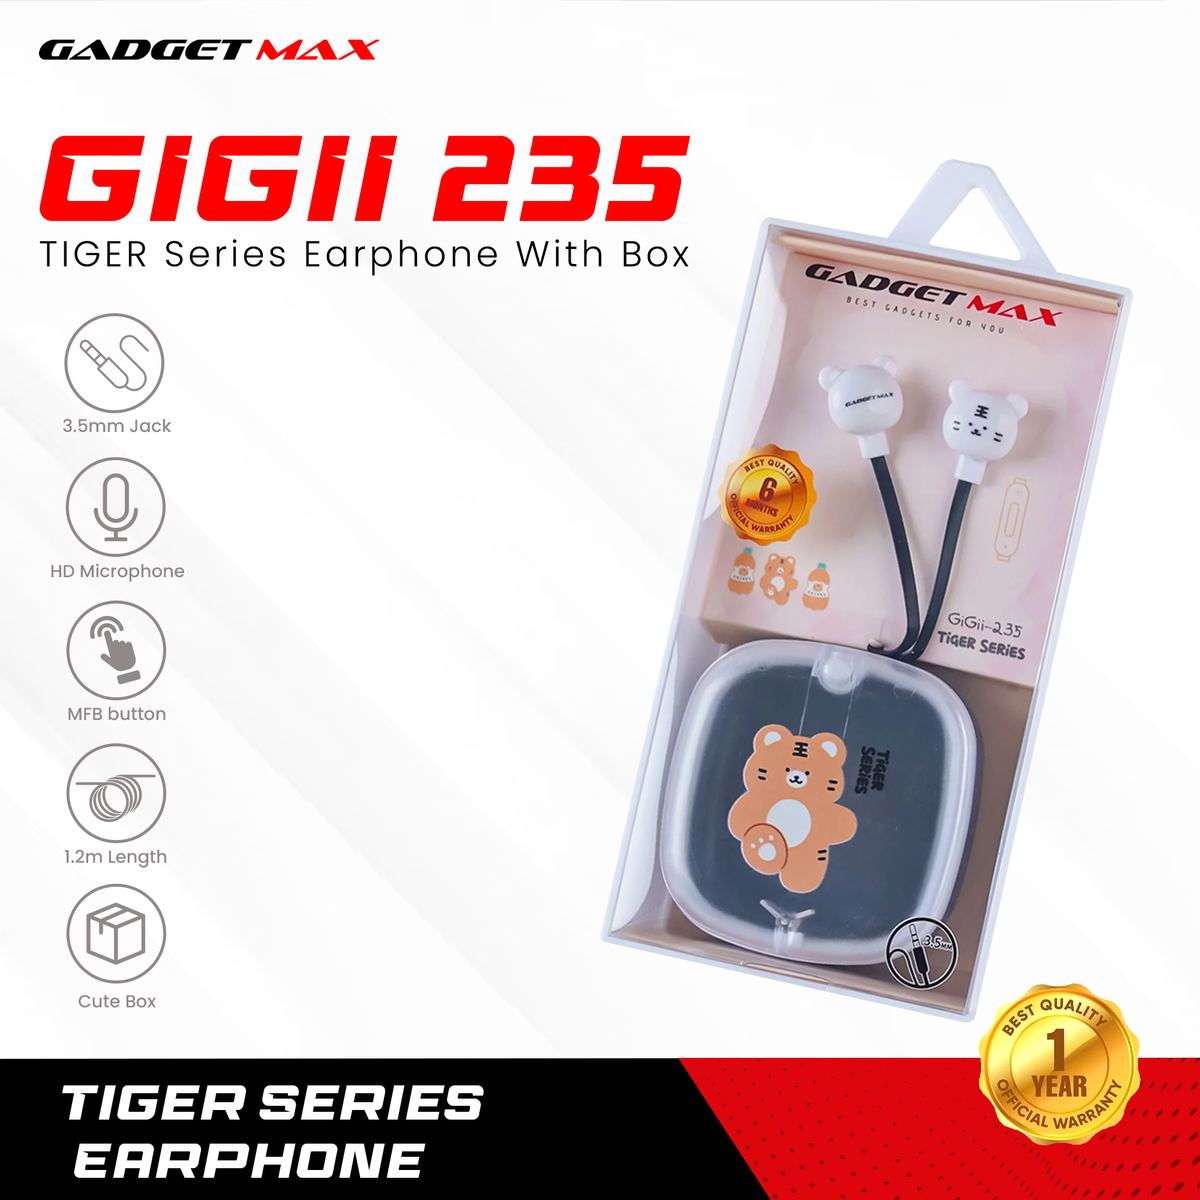 GADGET MAX GIGII-235 TIGER SERIES 3.5MM WIRED EARPHONE - BLACK